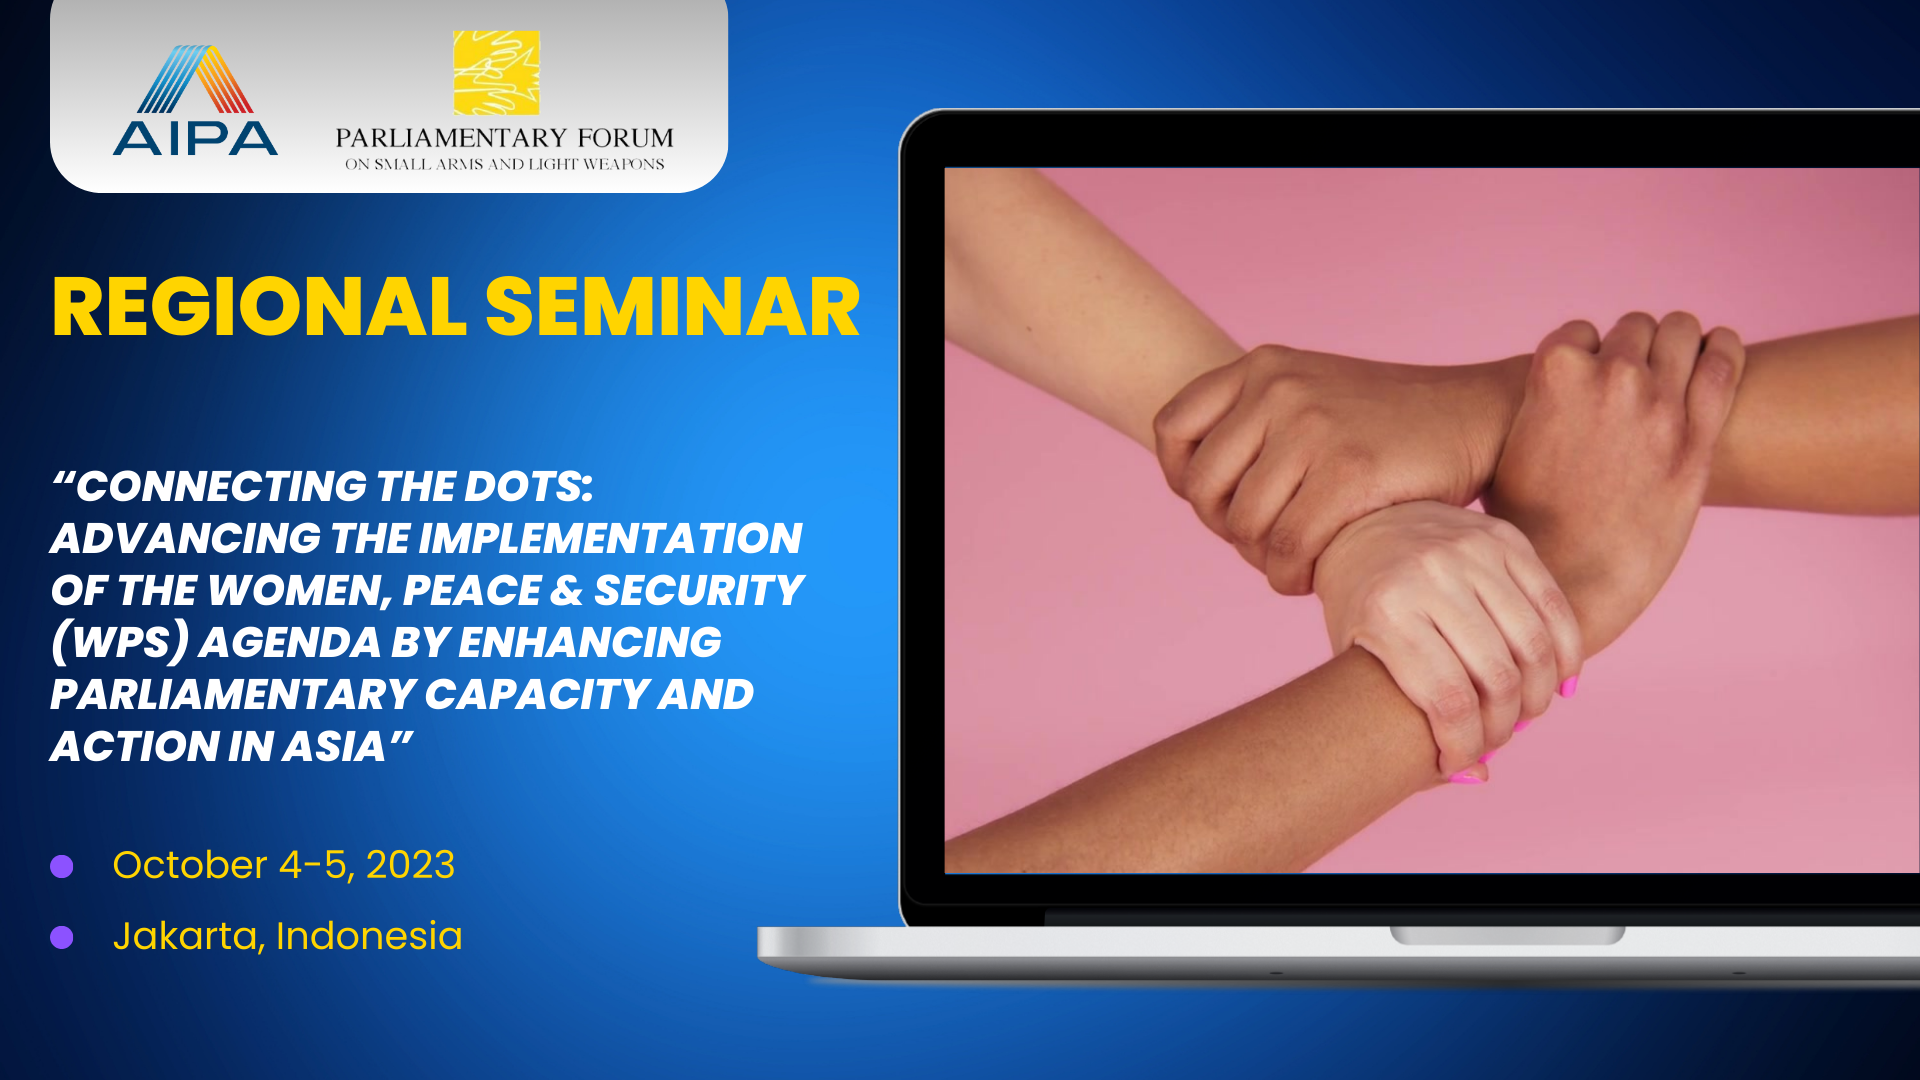 Regional Seminar AIPA – PFSALW: “Connecting the Dots: Advancing the implementation of the Women, Peace & Security Agenda (WPS) by enhancing parliamentary capacity and action in Asia”